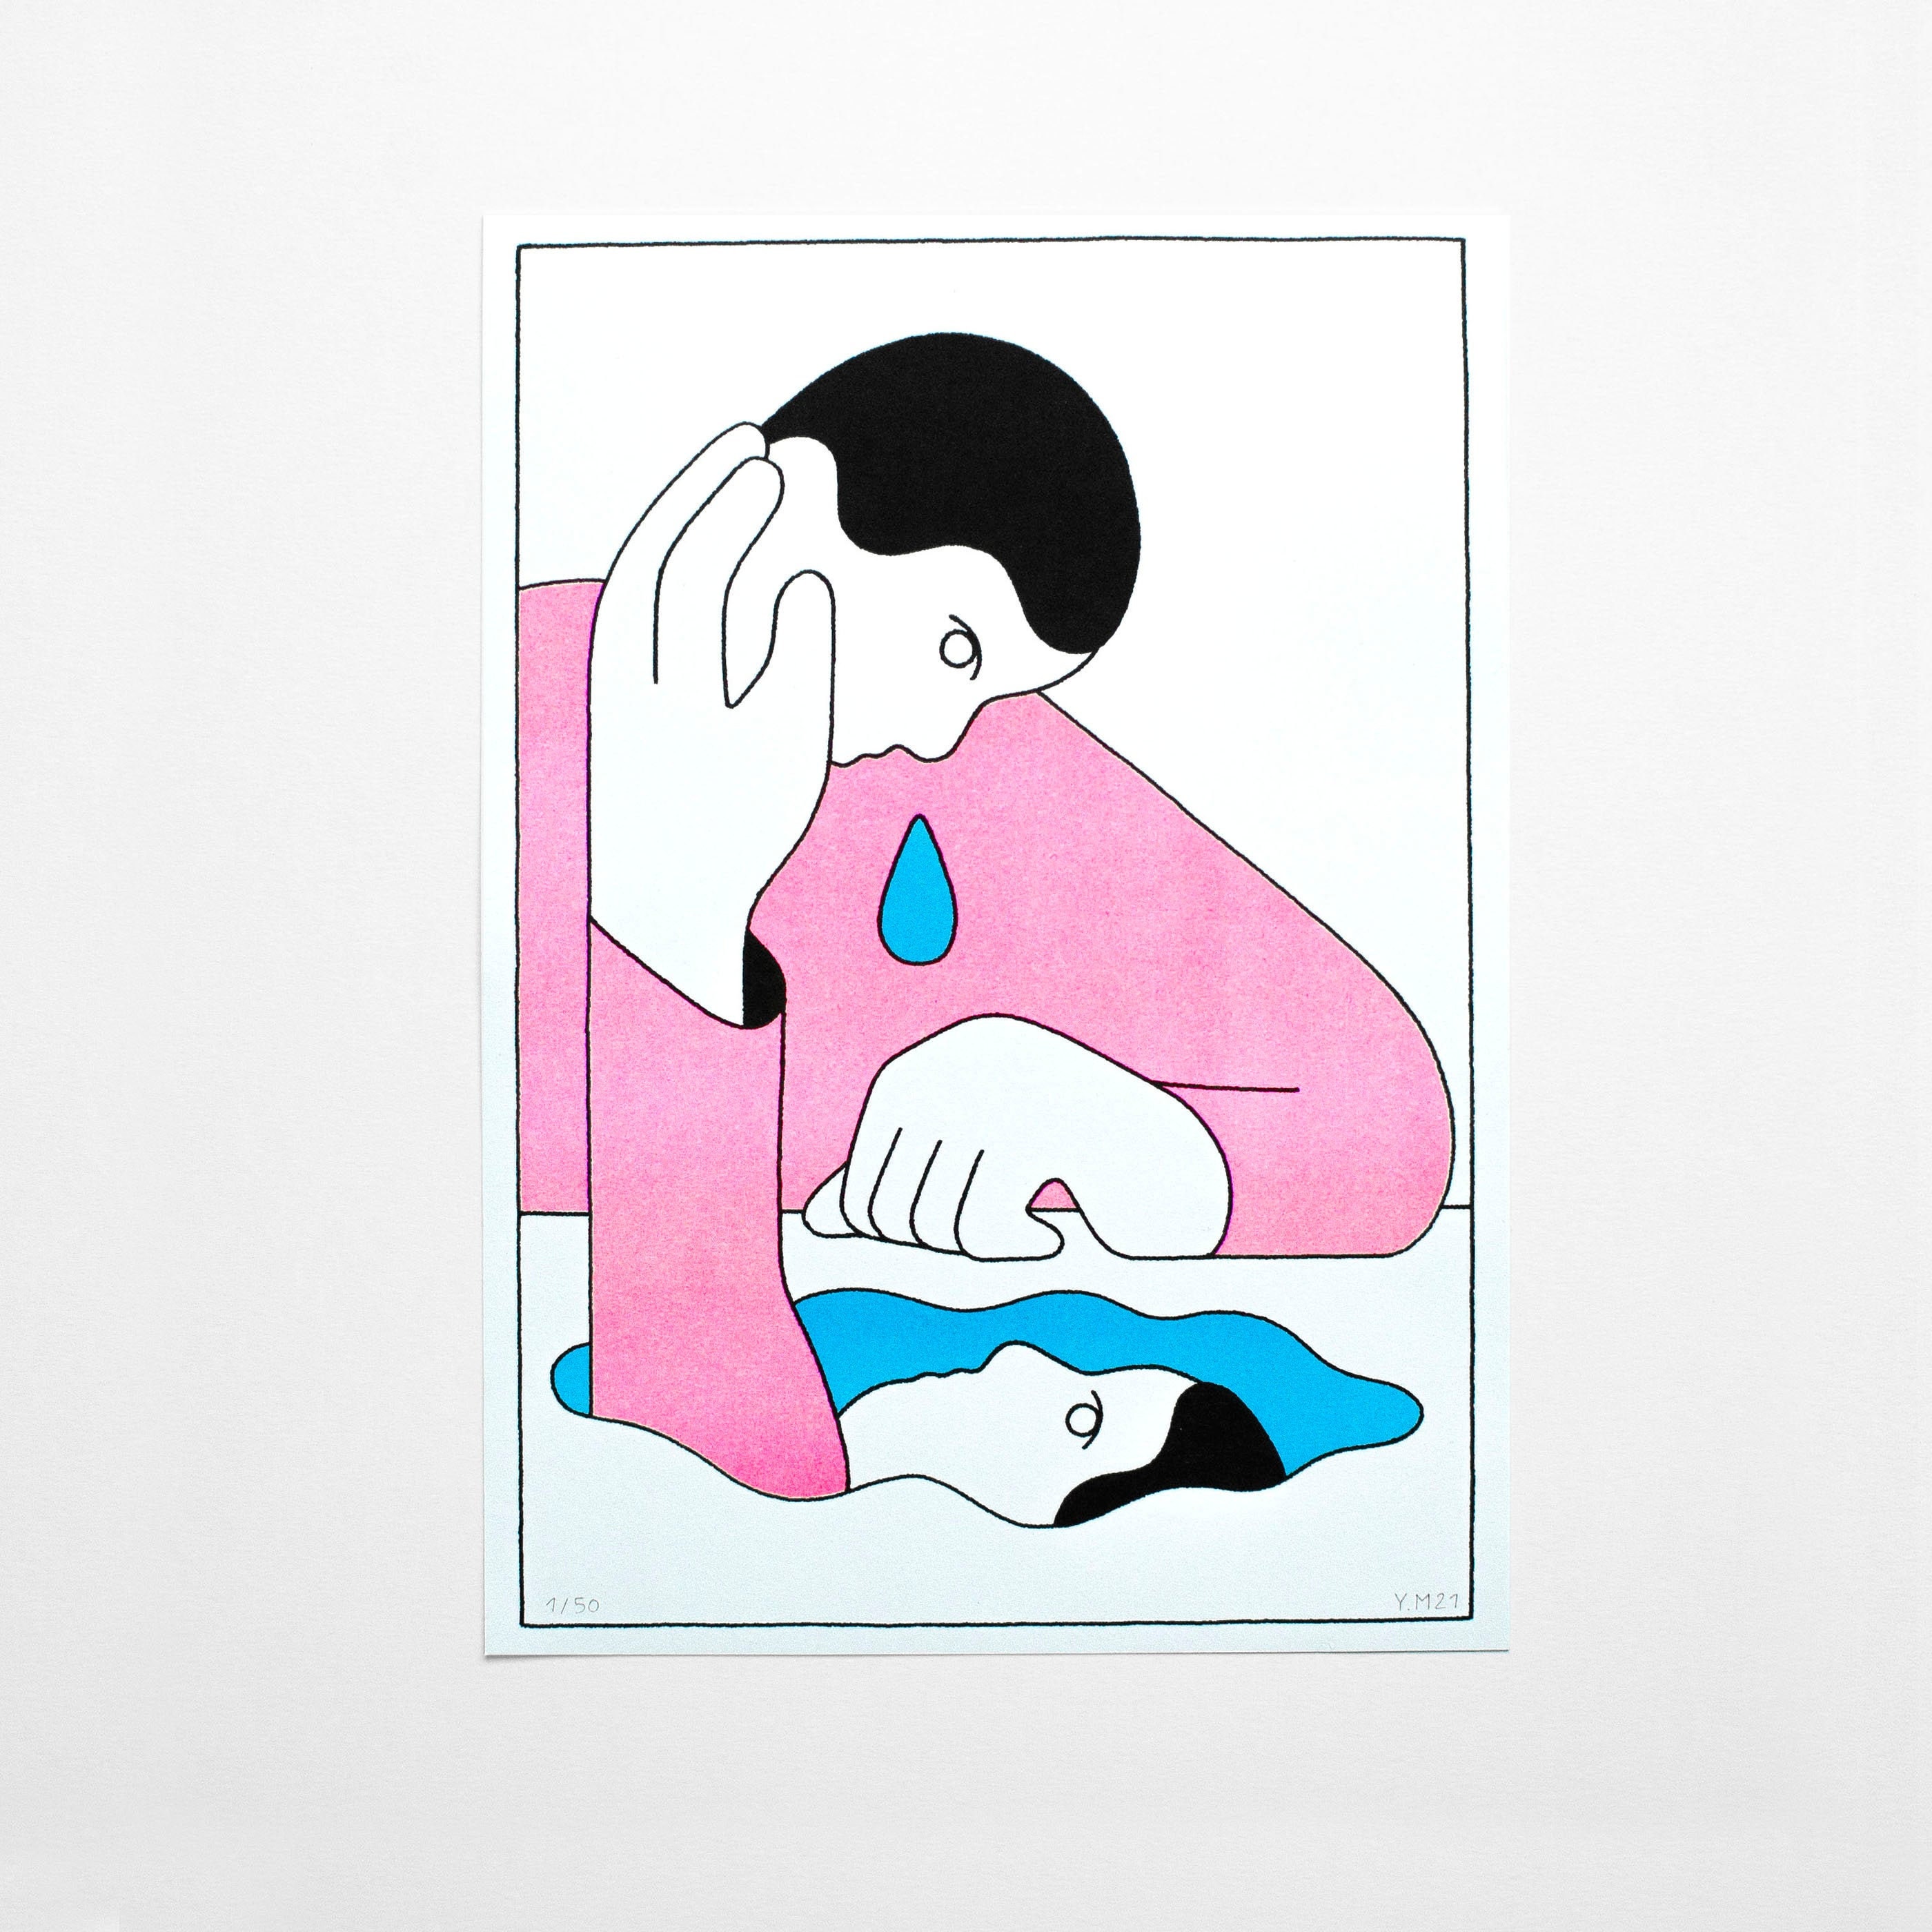 Minimal and simple illustrations by Agathe Sorlet